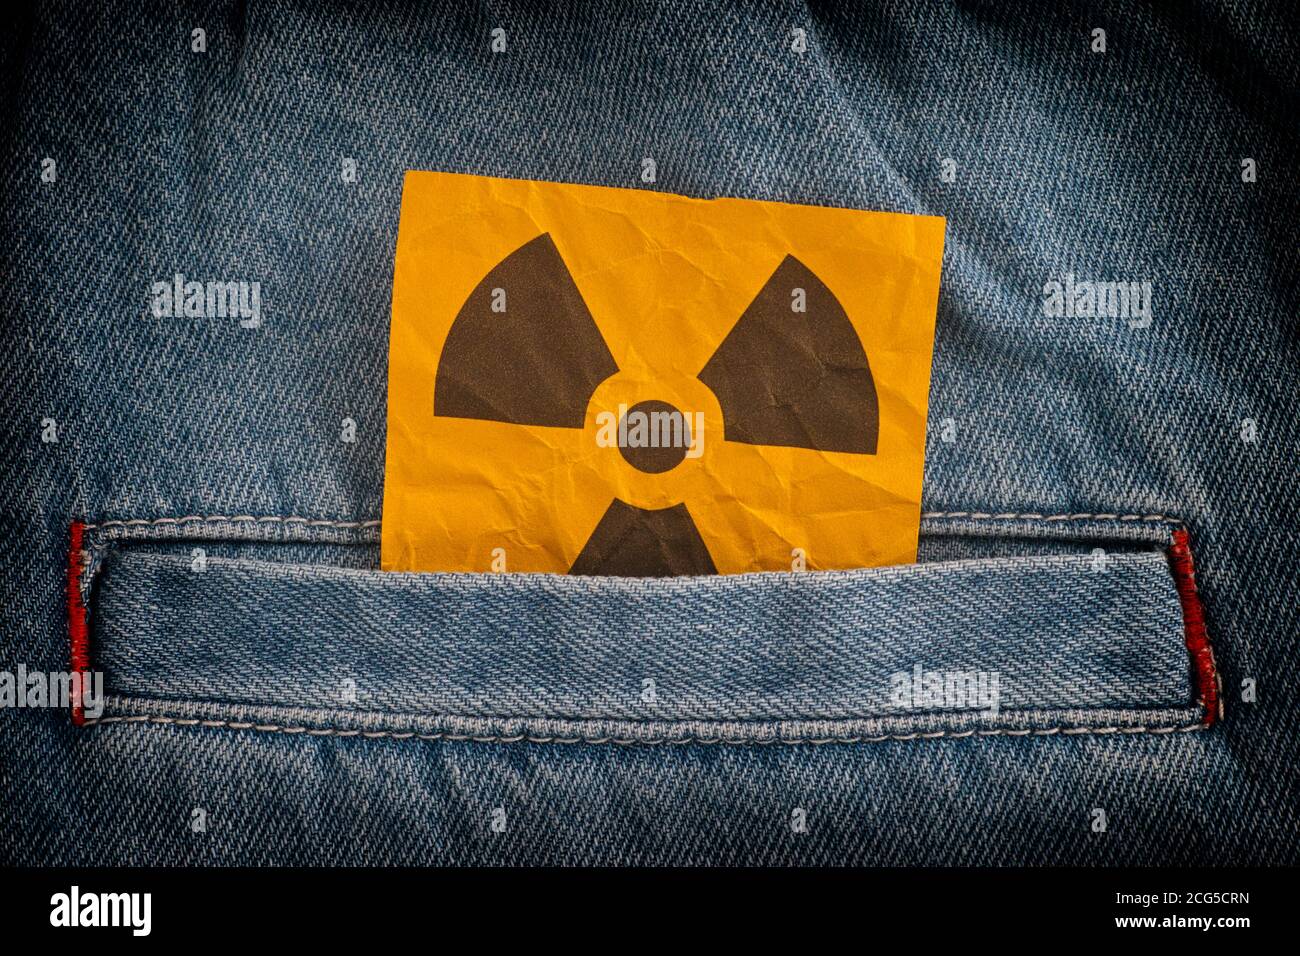 Radiation warning sign sticking out from a jeans pocket. Close up. Stock Photo